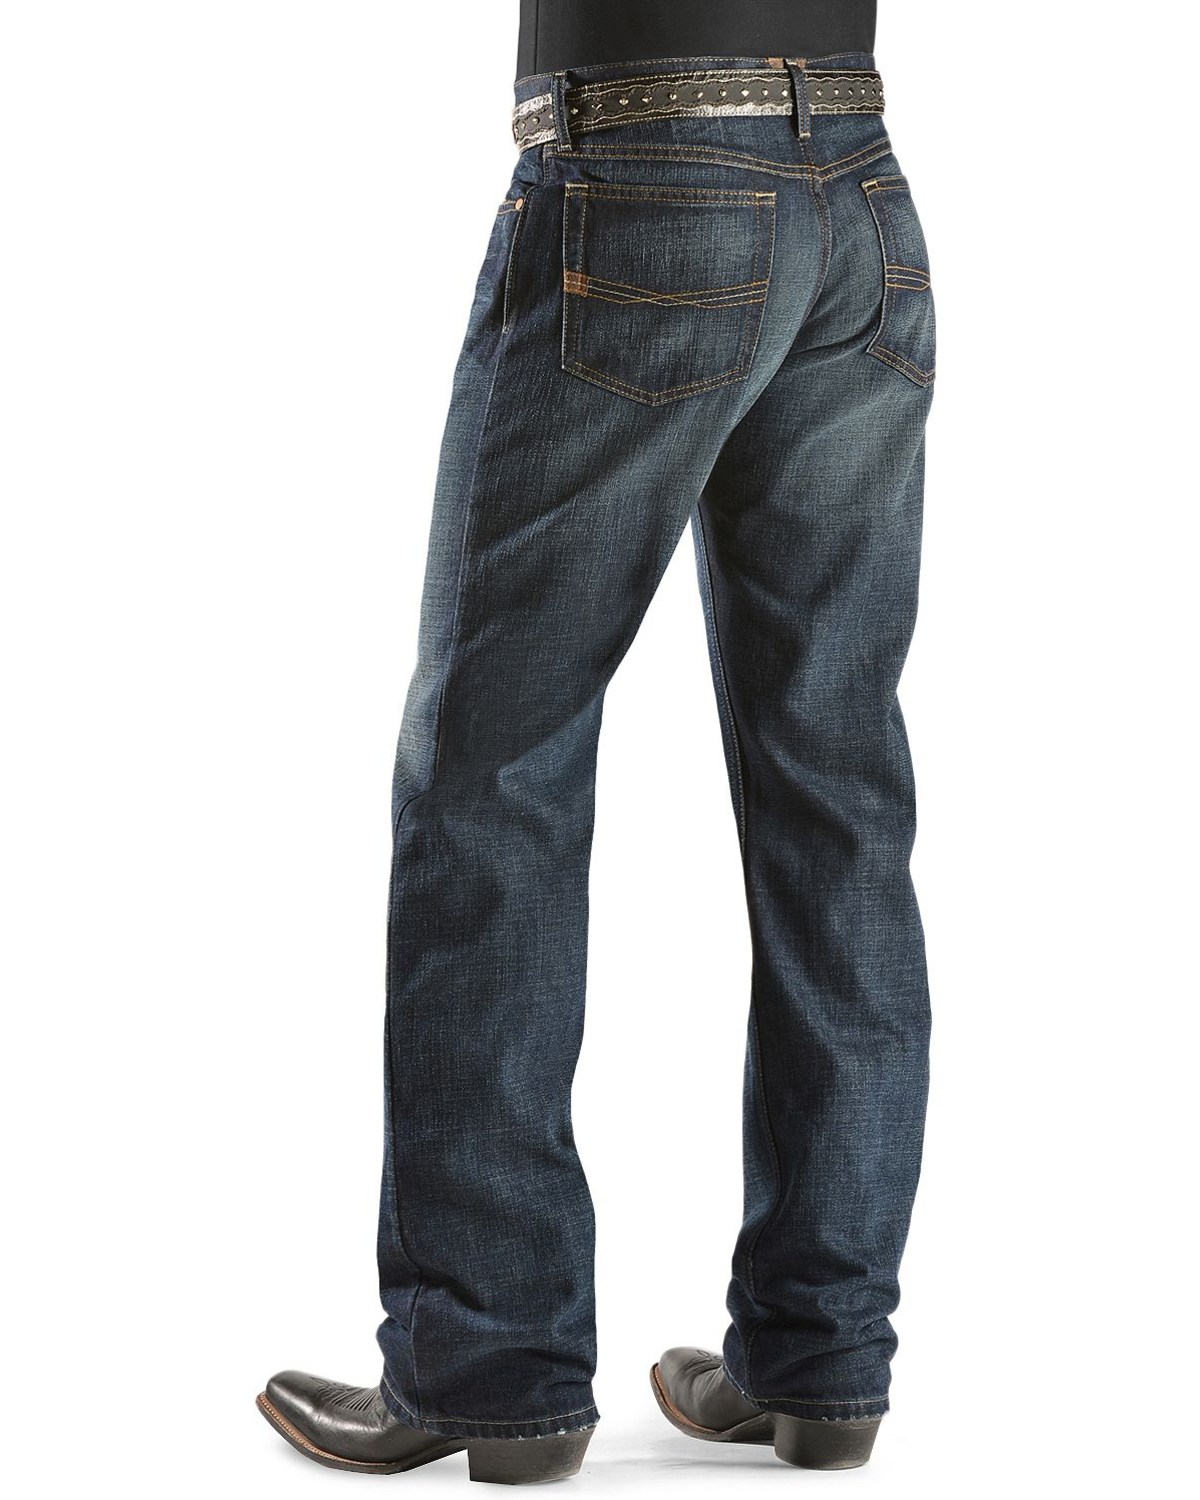 Ariat Men's M4 Roadhouse Low Rise Relaxed Fit Jeans